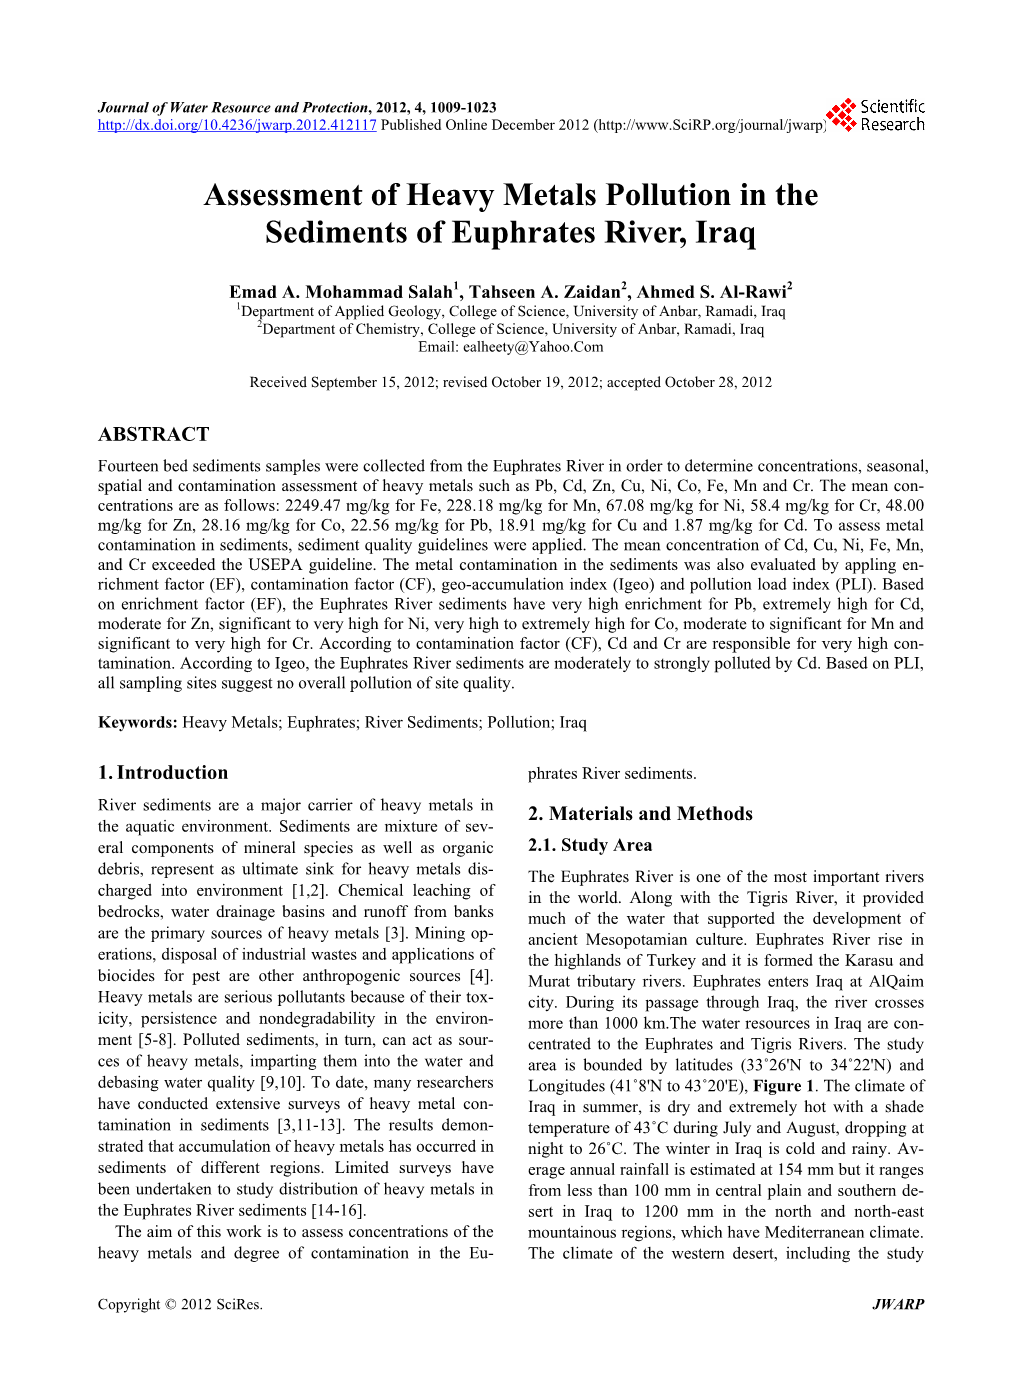 Assessment of Heavy Metals Pollution in the Sediments of Euphrates River, Iraq